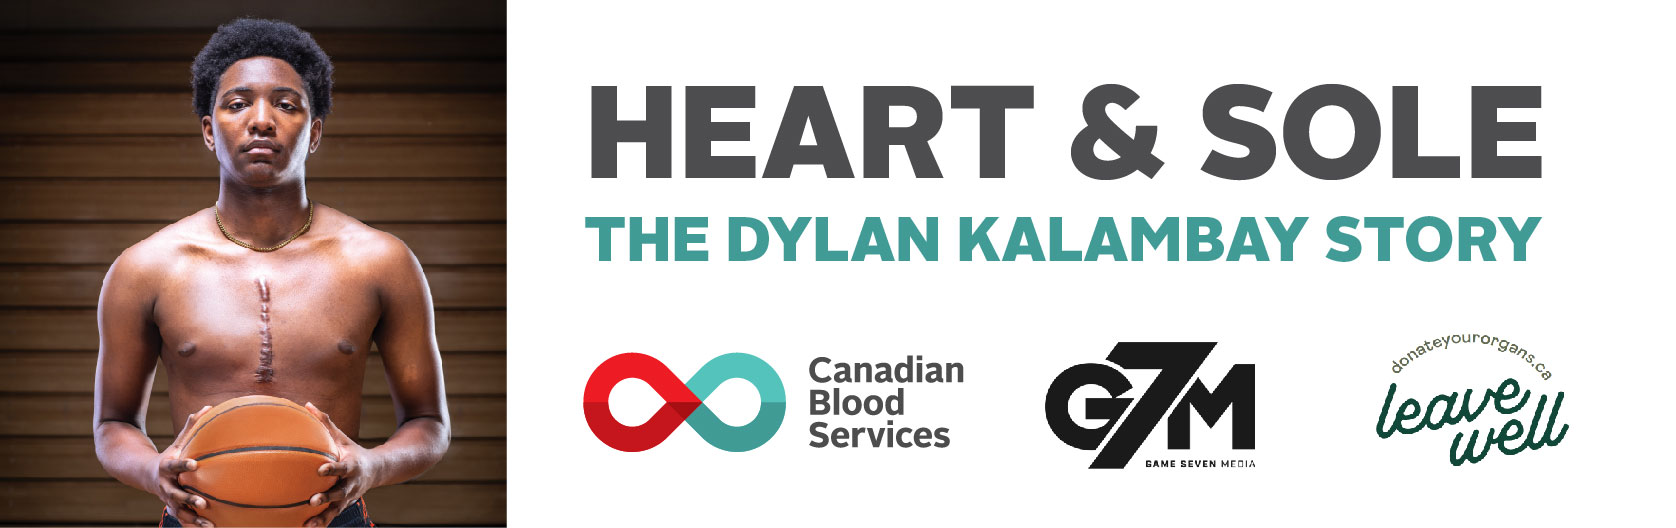 promotional image for the film Heart and Sole with logos for Leave Well, Canadian Blood Services and Ridley College